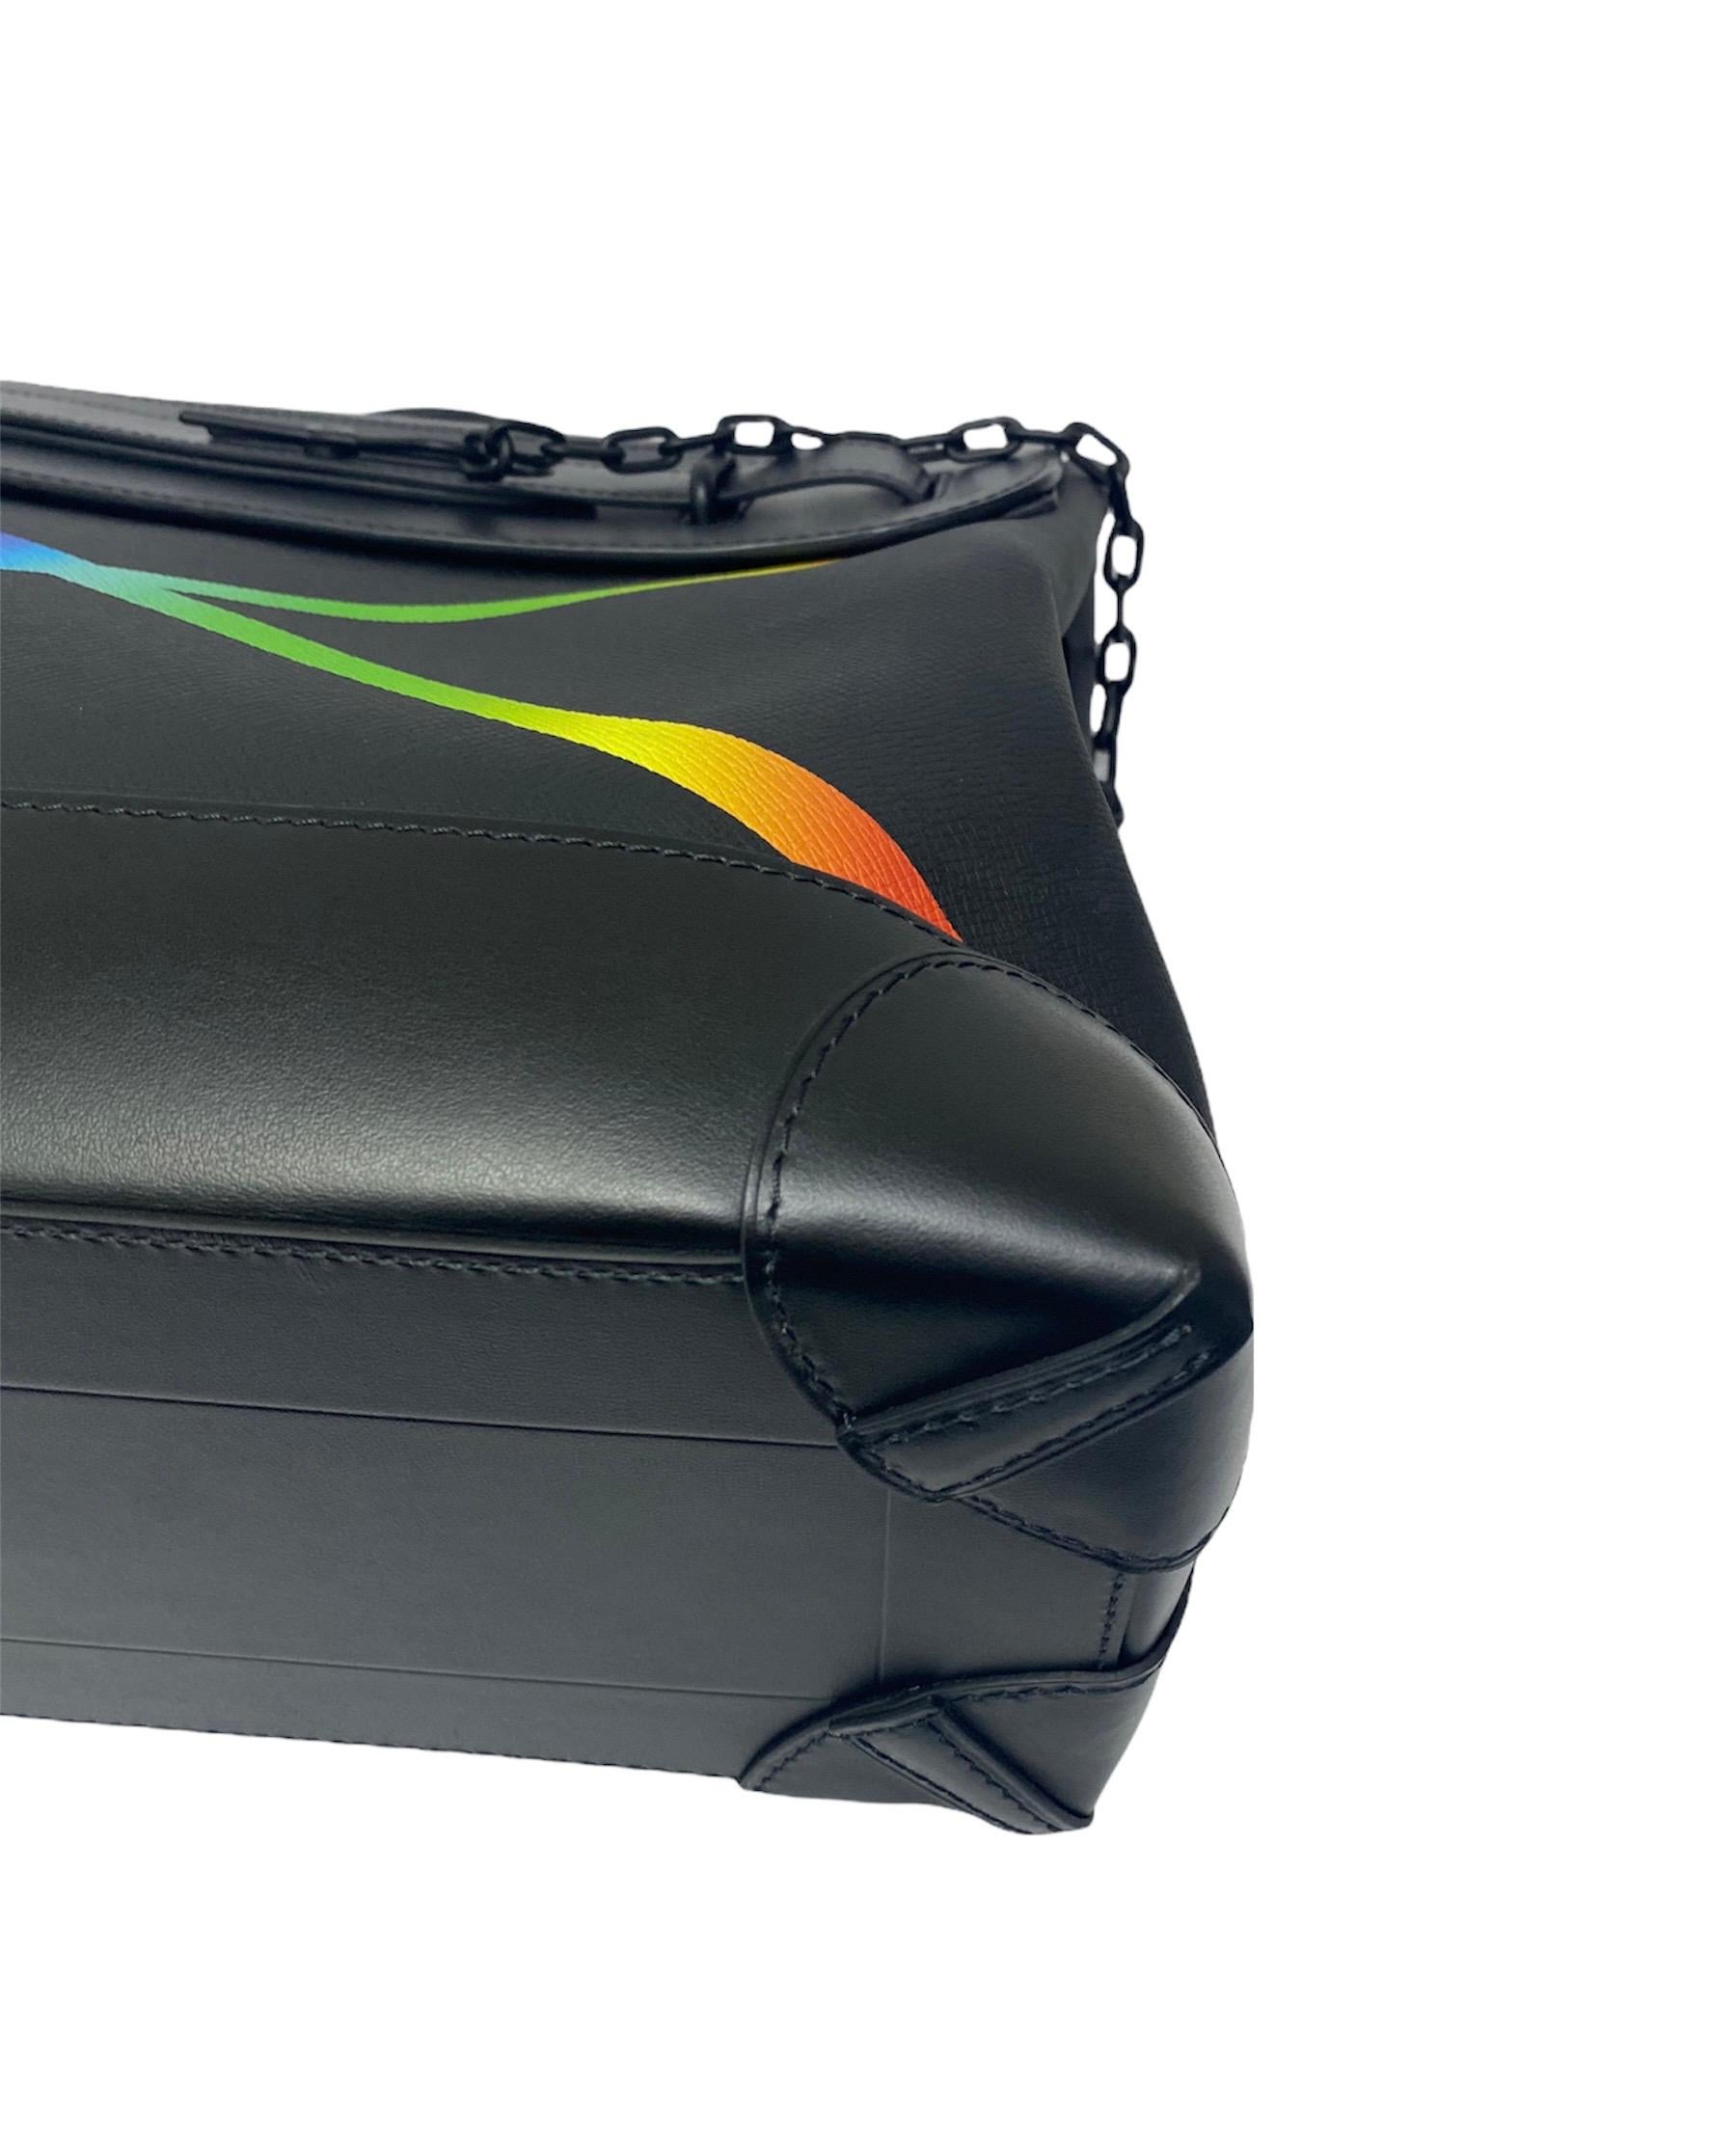 Women's or Men's Louis Vuitton Black Leather  Taiga Rainbow Steamer PM Limited  For Sale